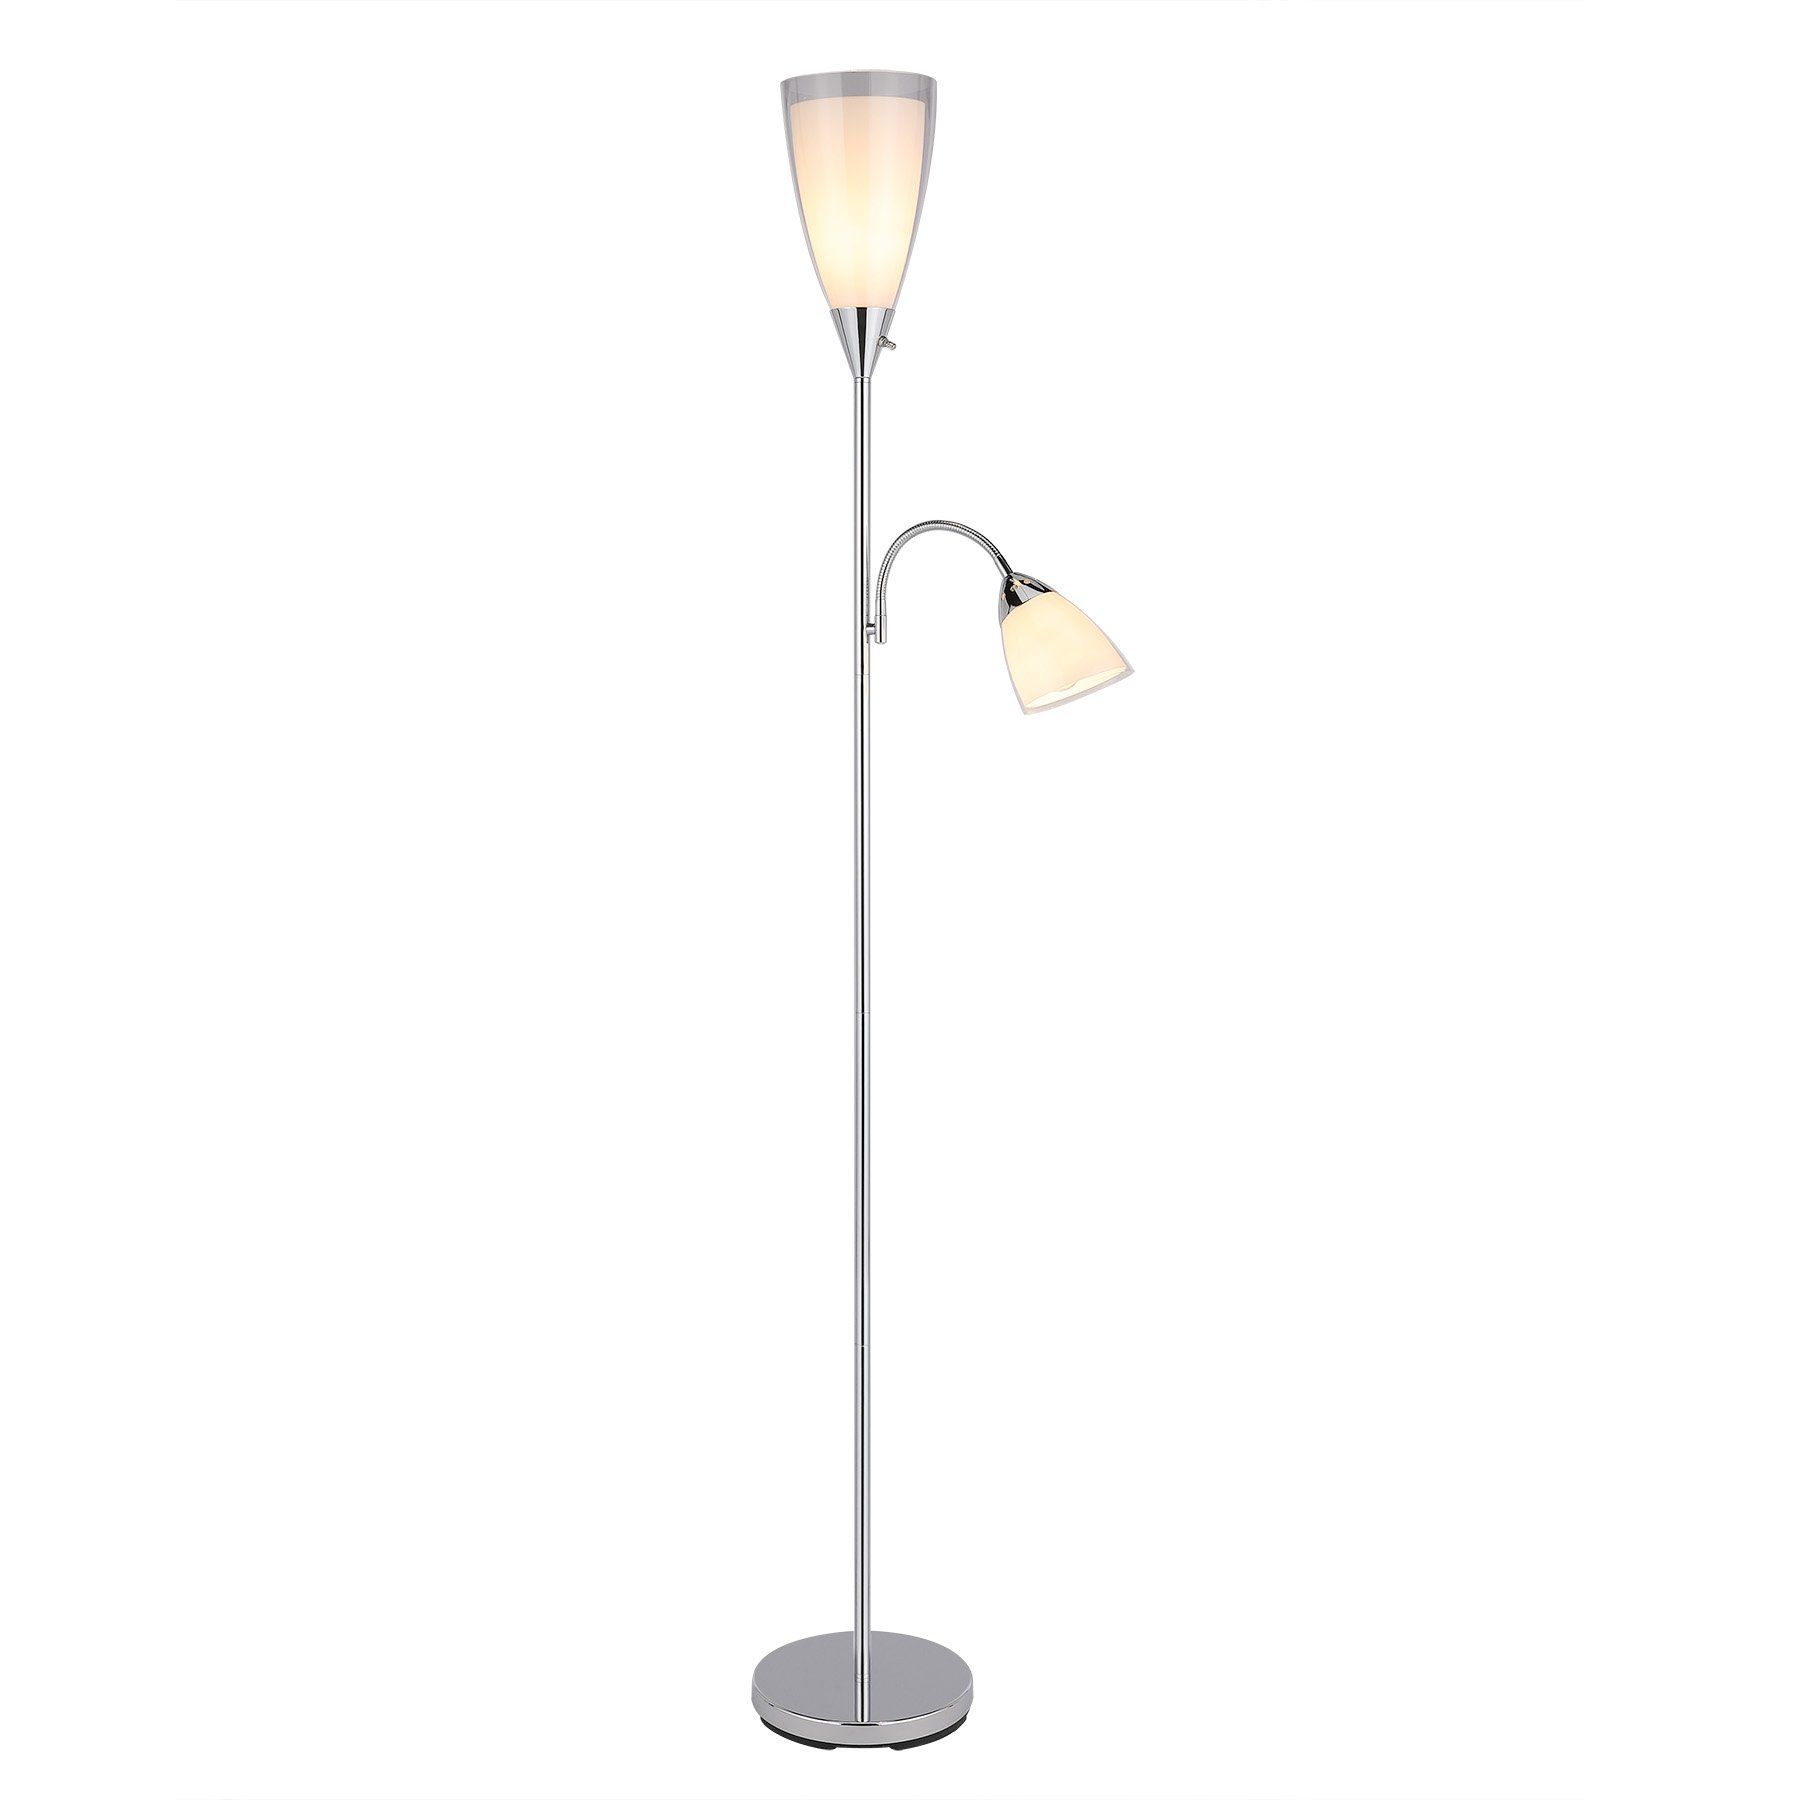 Co Z 3 Way Combo Torchiere Floor Lamp With Side Light intended for dimensions 1800 X 1800